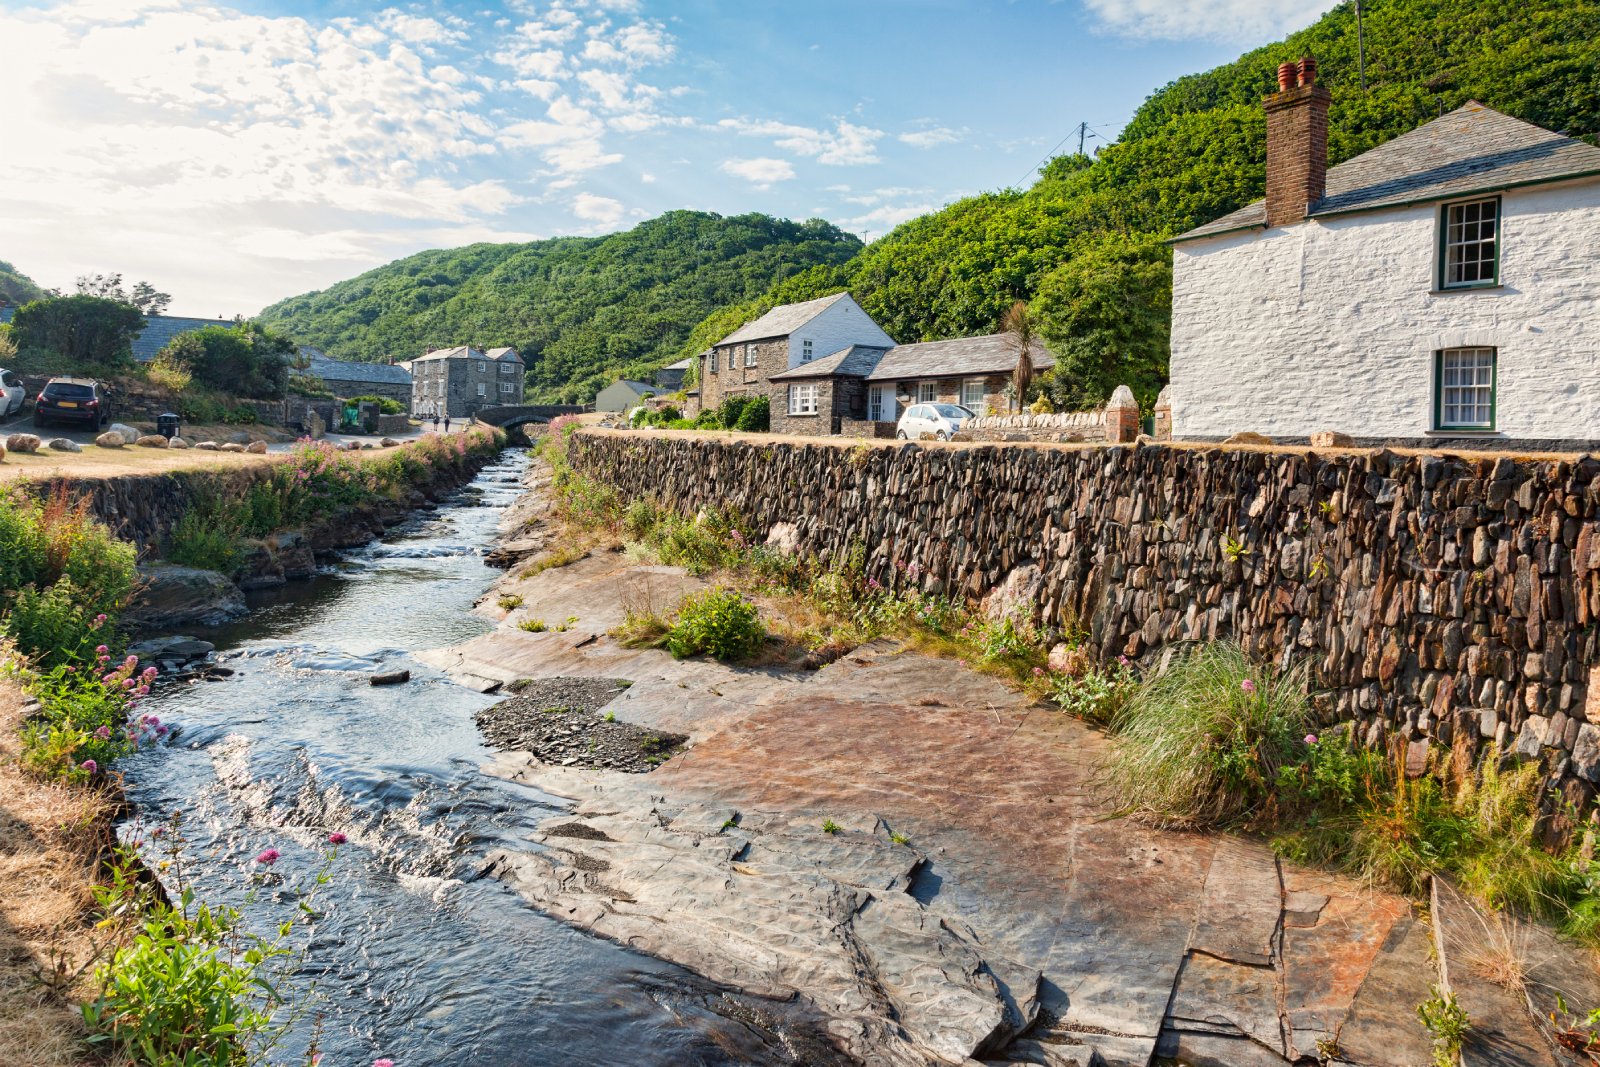 Image Credit: Shutterstock / travellight <p>Boscastle combines dramatic coastal scenery with a quaint harbour village atmosphere. Flooding history and narrow roads can make access challenging, but the coastal walks are worth the effort.</p>